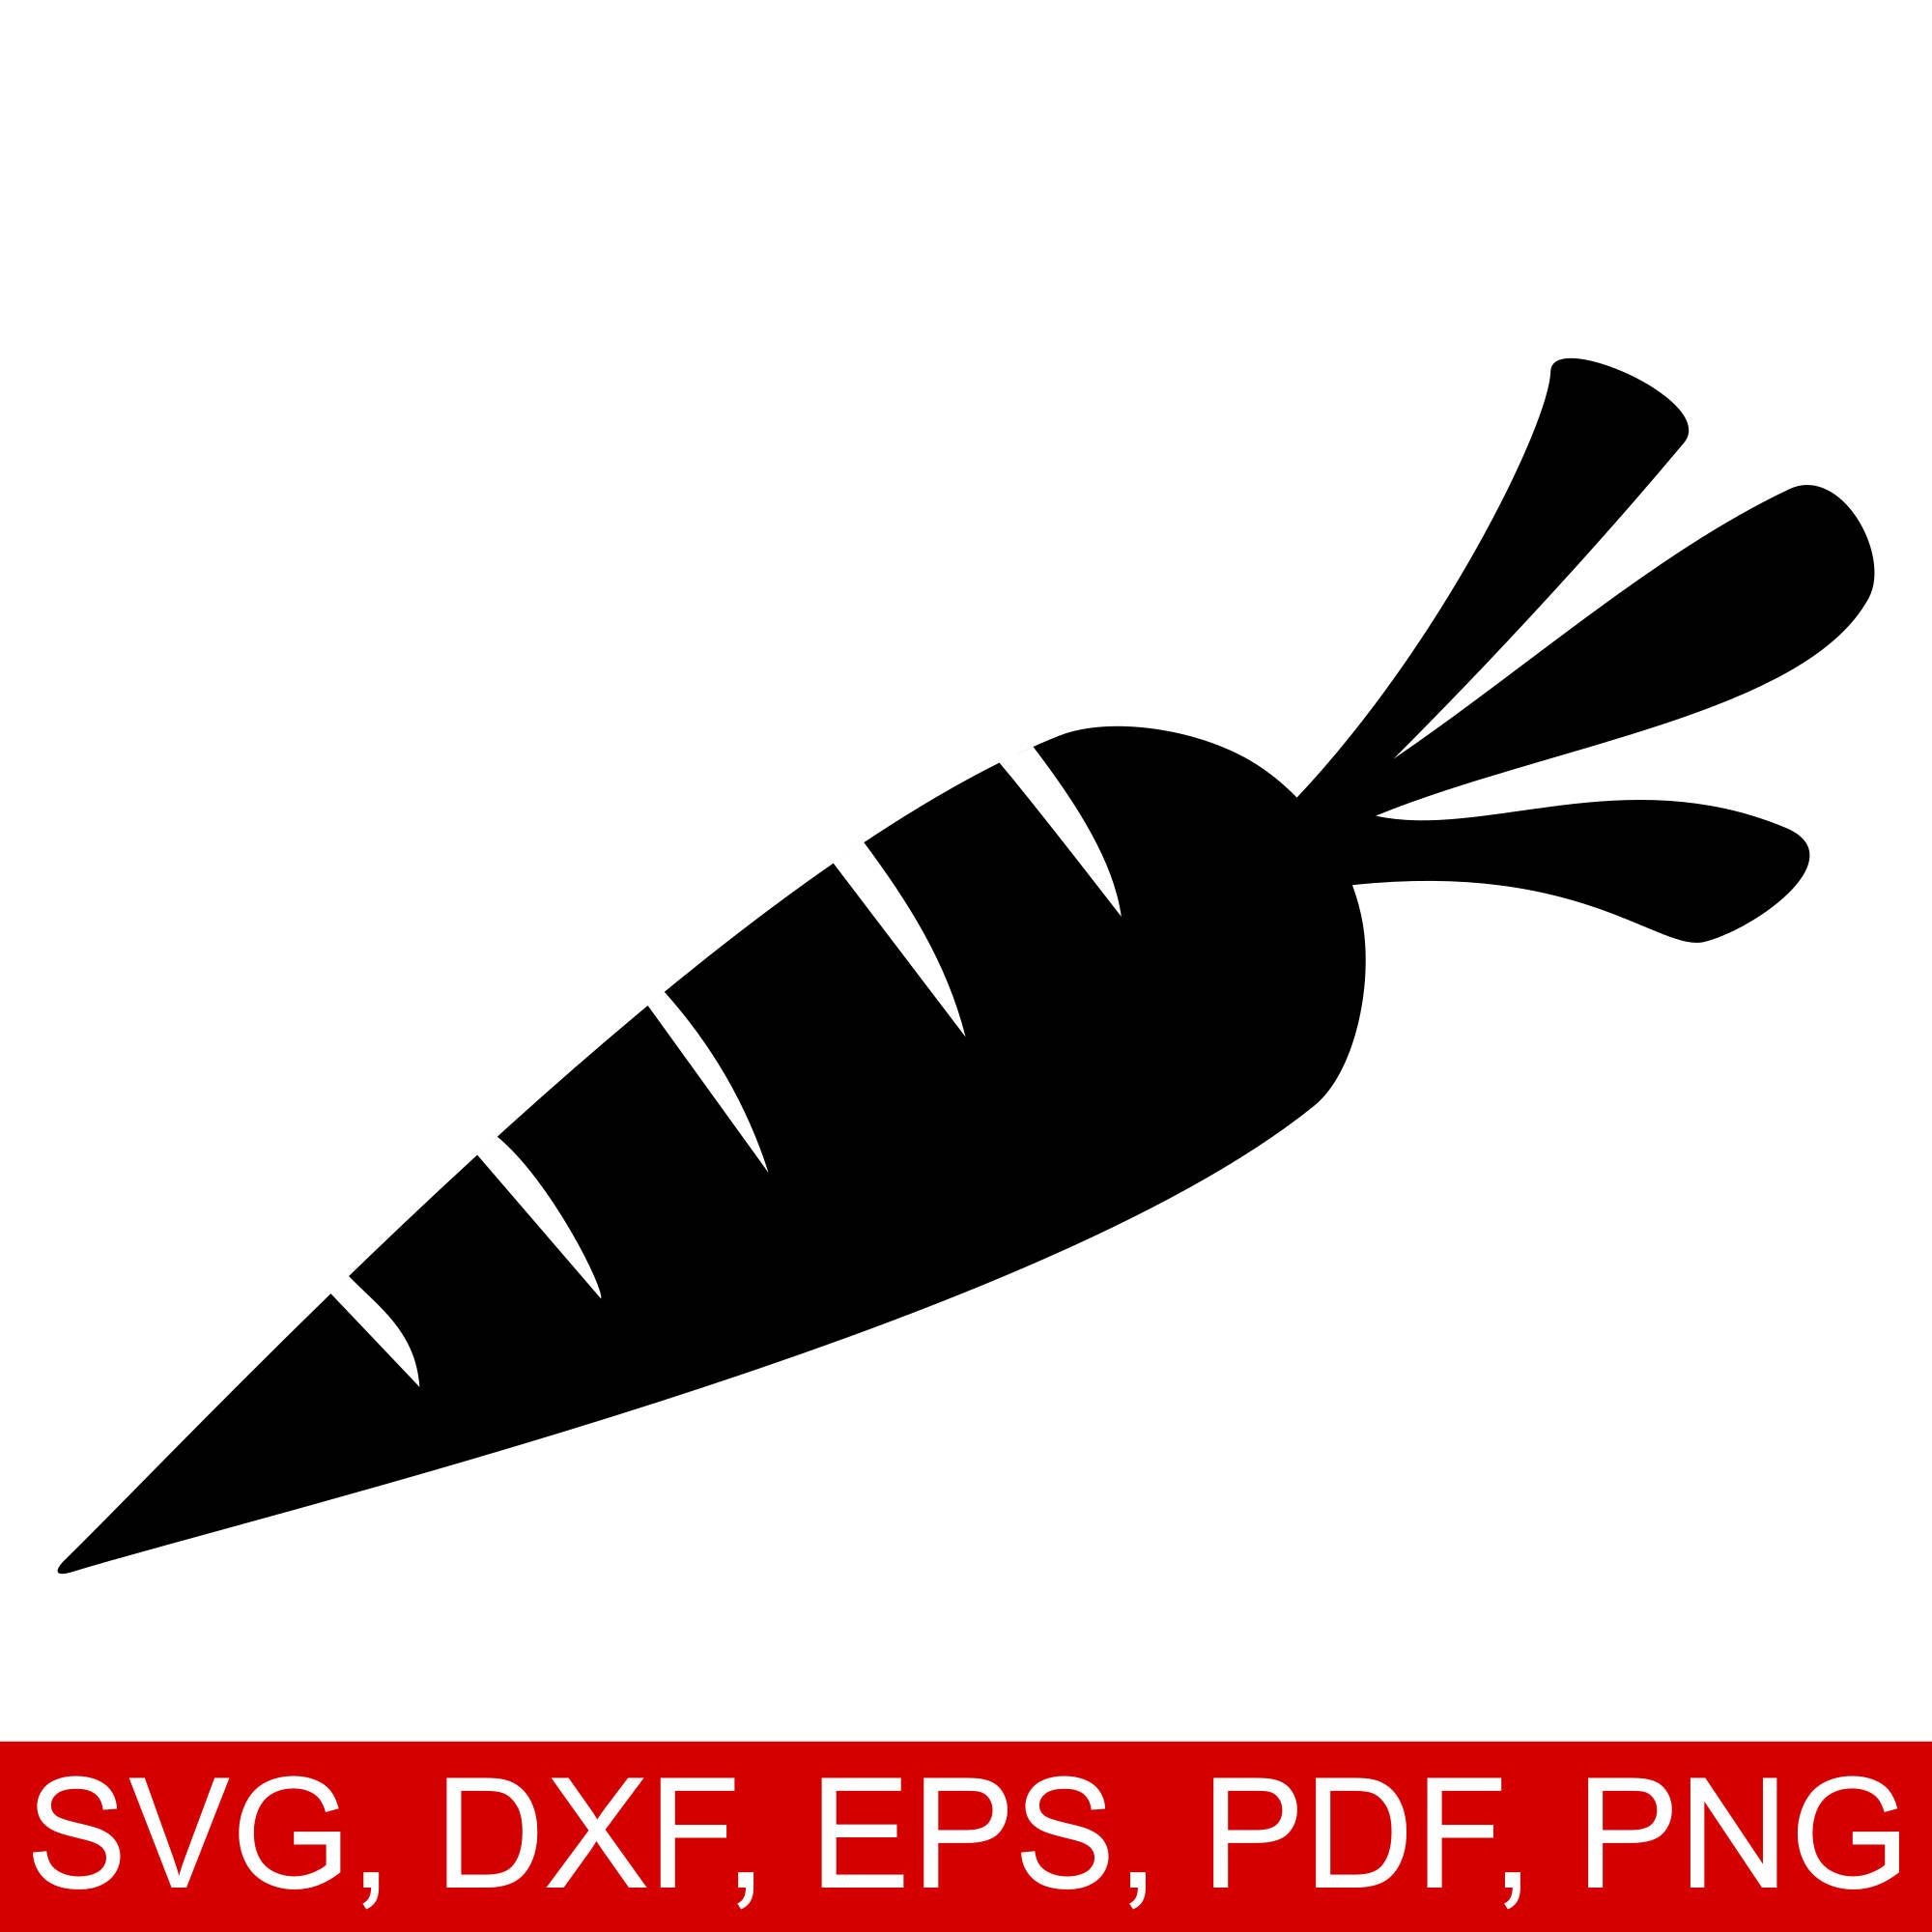 Svg and files printable. Carrot clipart silhouette